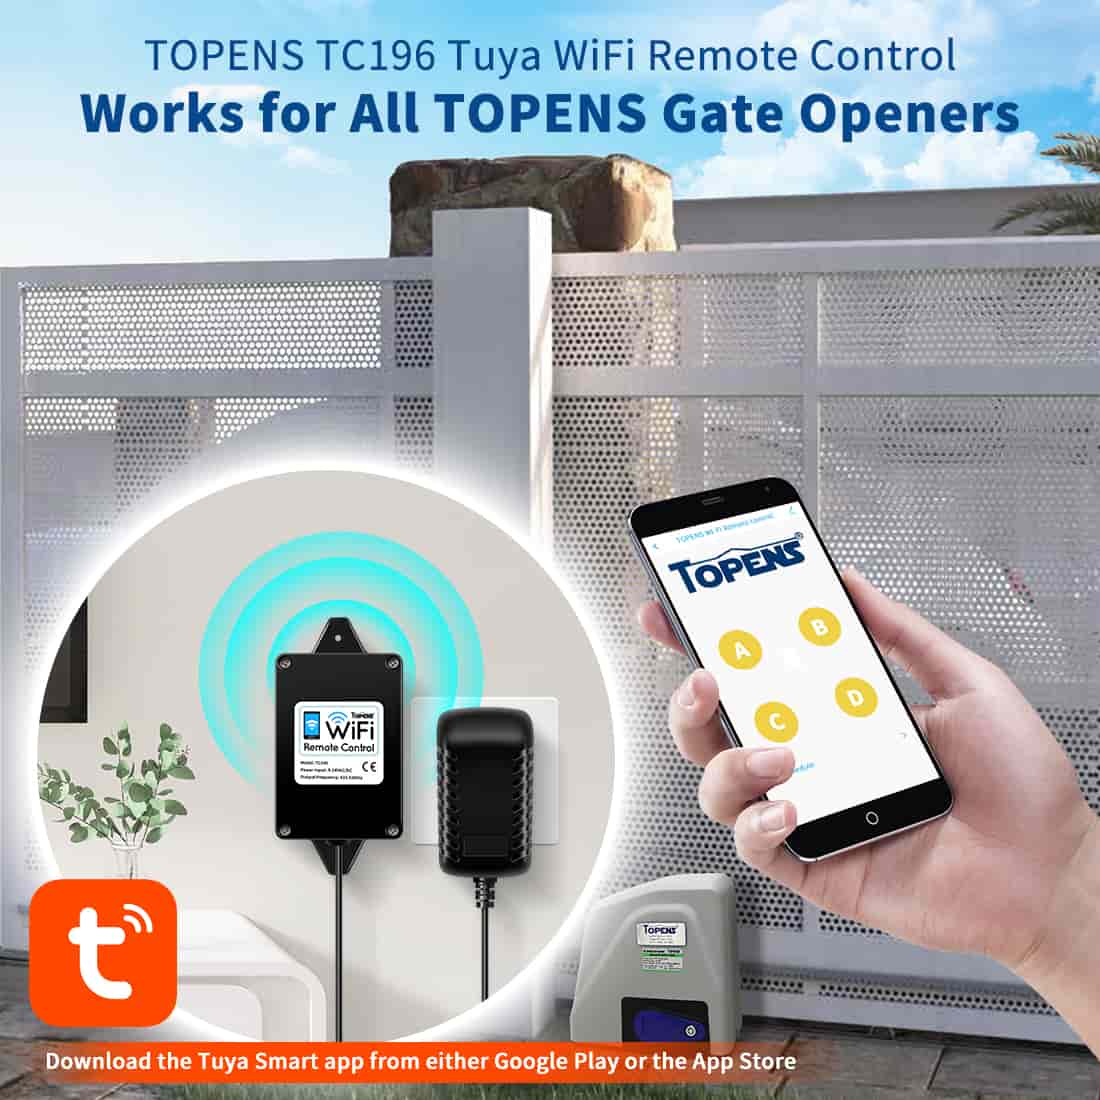 TC196 WiFi Remote Control Works for All TOPENS Gate Openers